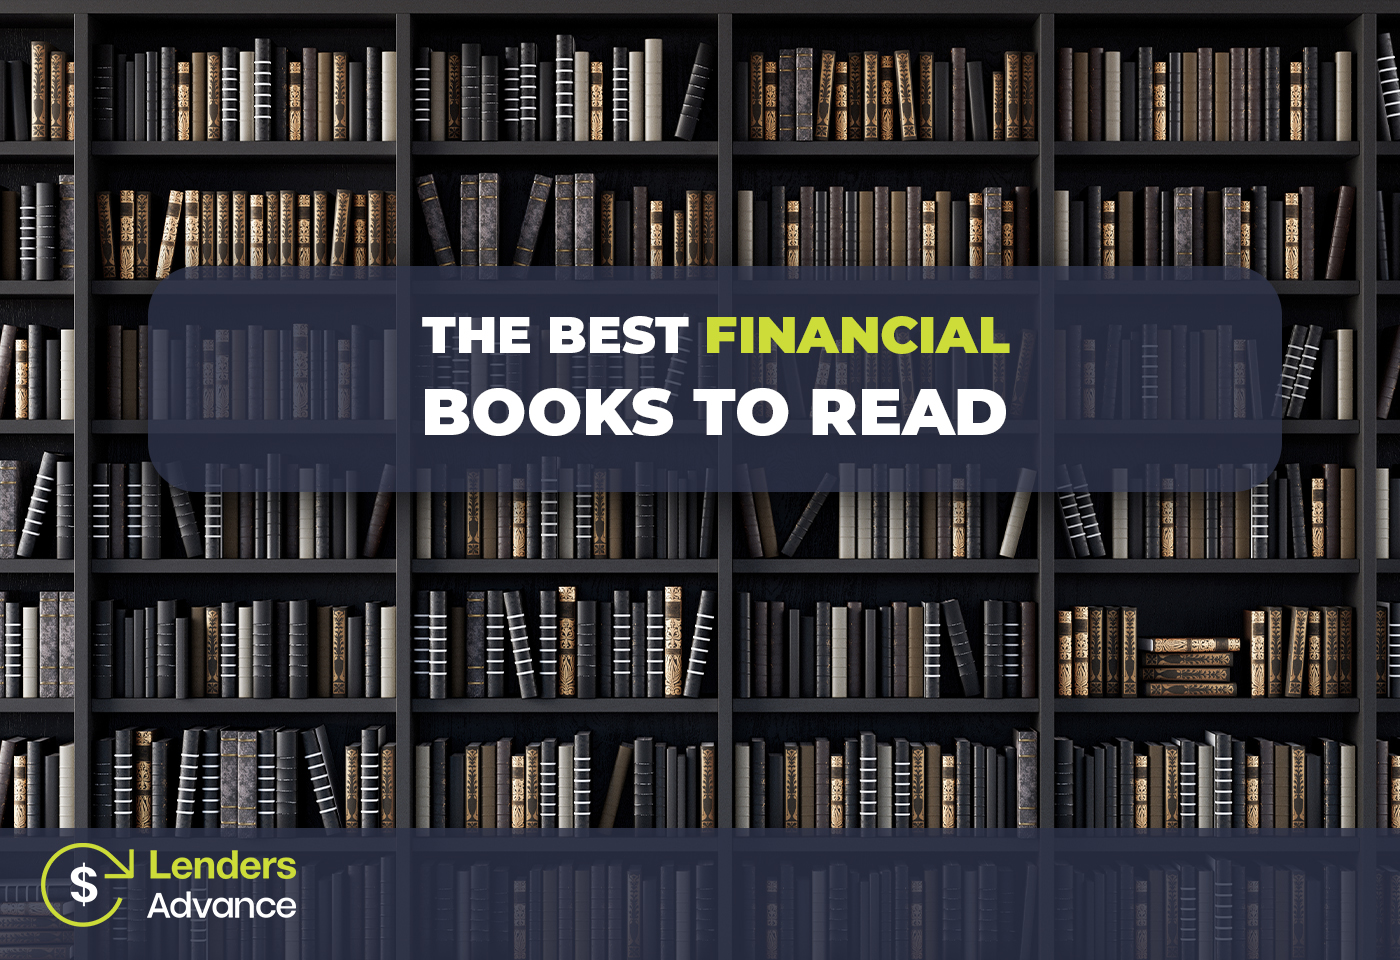 The Best Financial Books to Read